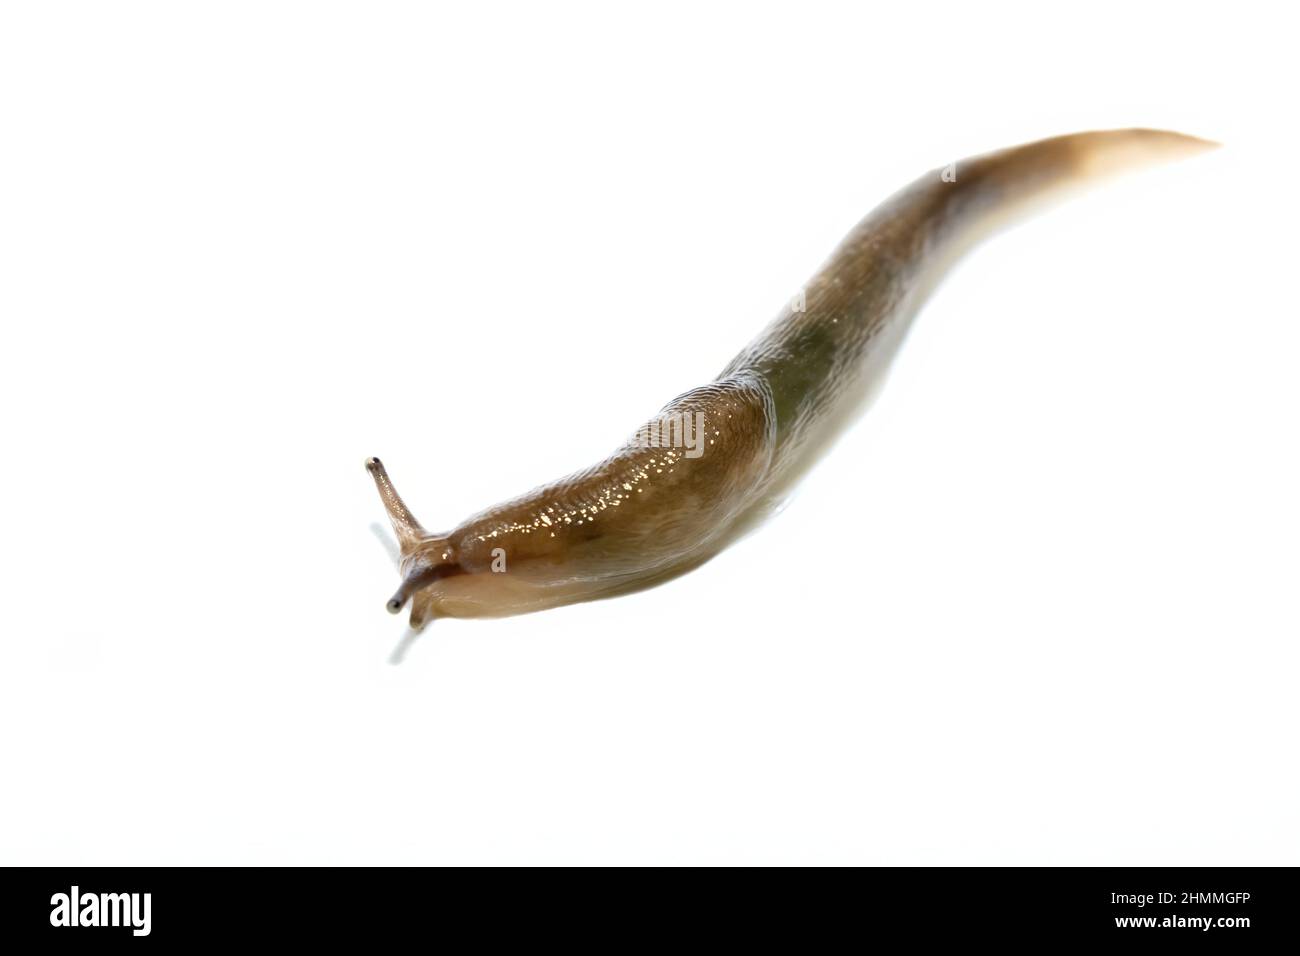 A common ground slug, arion ater, moving on a white background Stock Photo